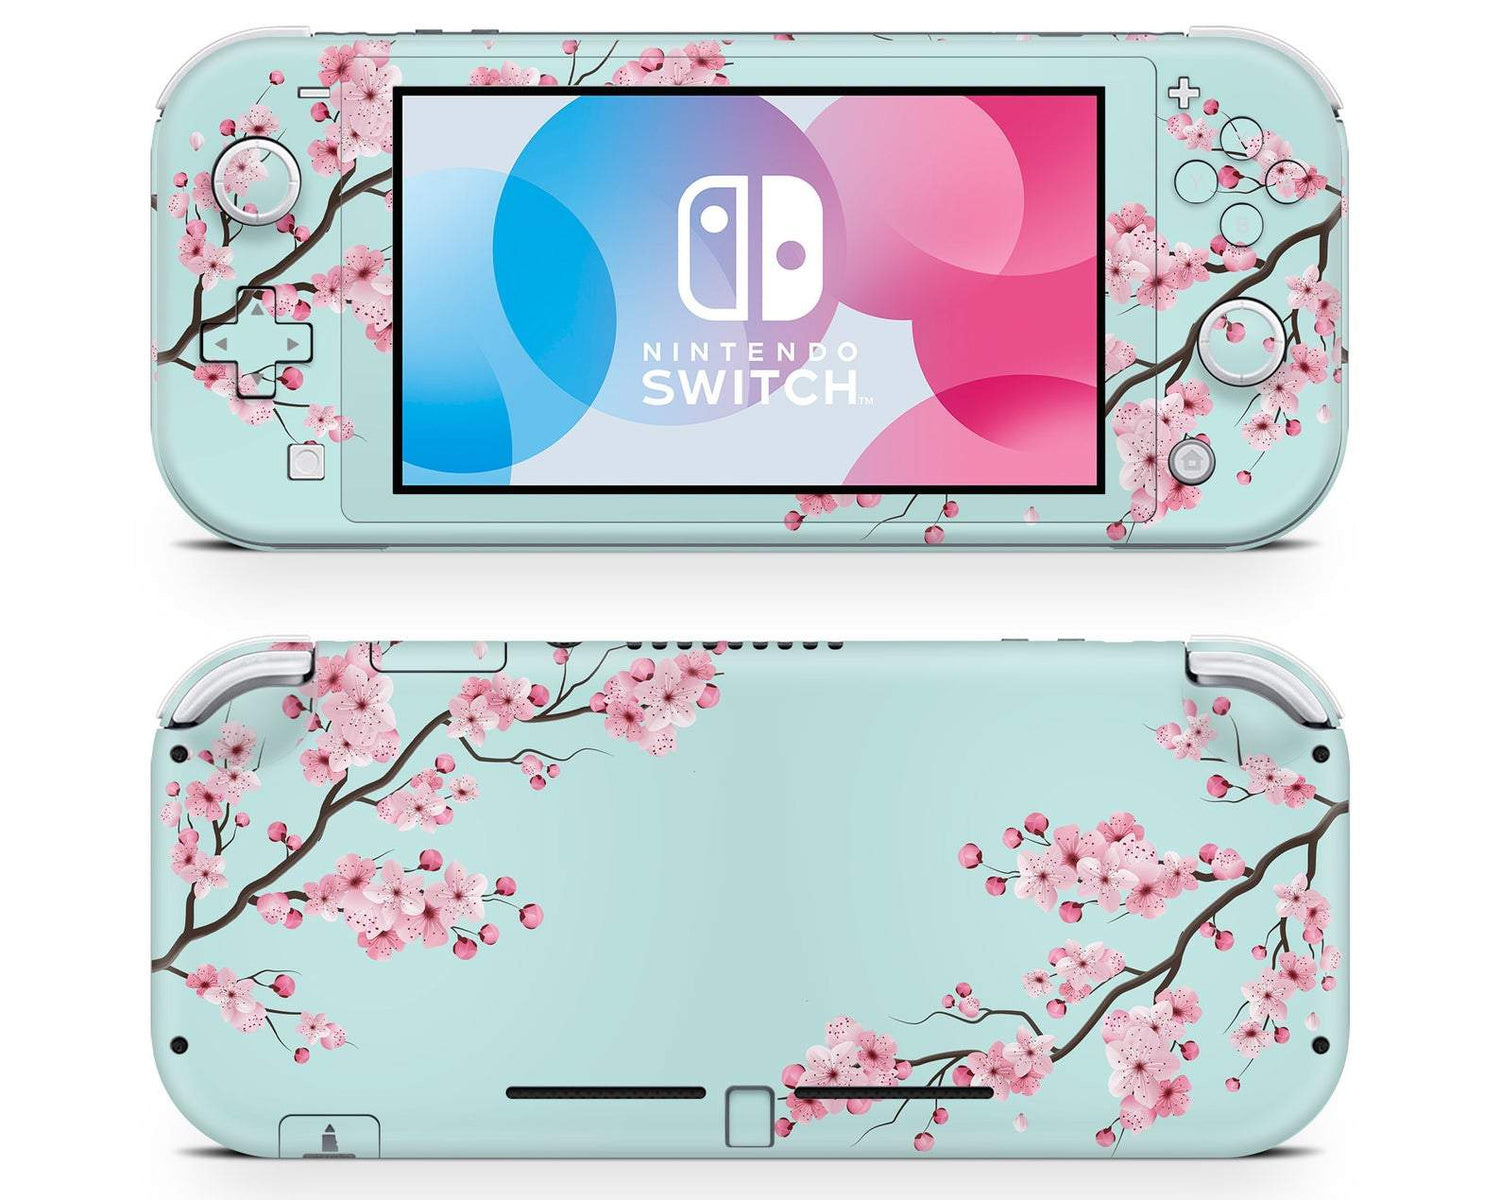 Lux Skins Nintendo Switch Lite Teal Mint Cherry Blossom Classic no logo Skins - Art Floral Skin